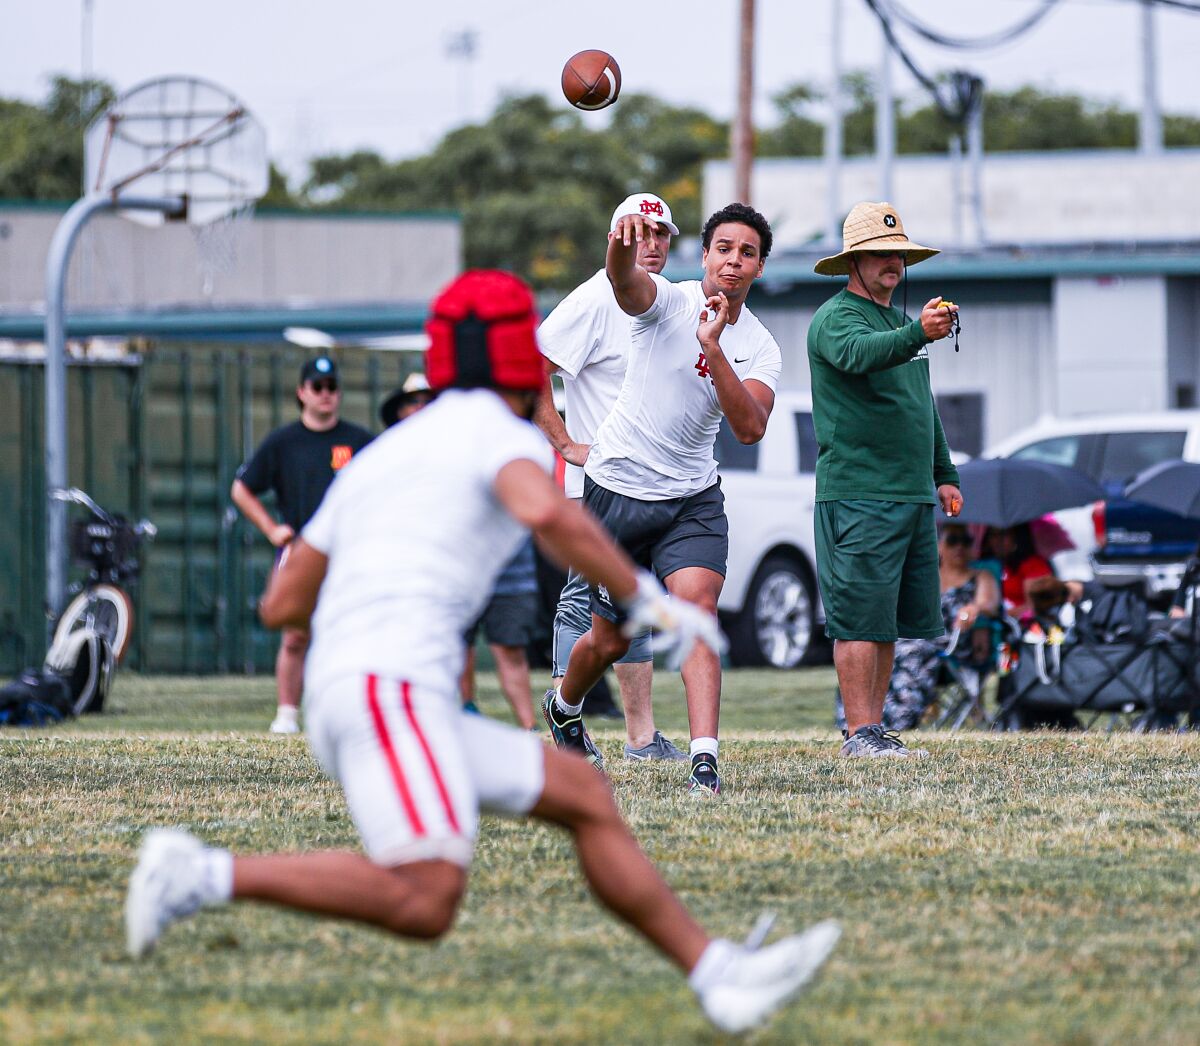 Stanford-bound quarterback Elijah Brown of Mater Dei fires a pass at Battle of the Beach passing tourney.